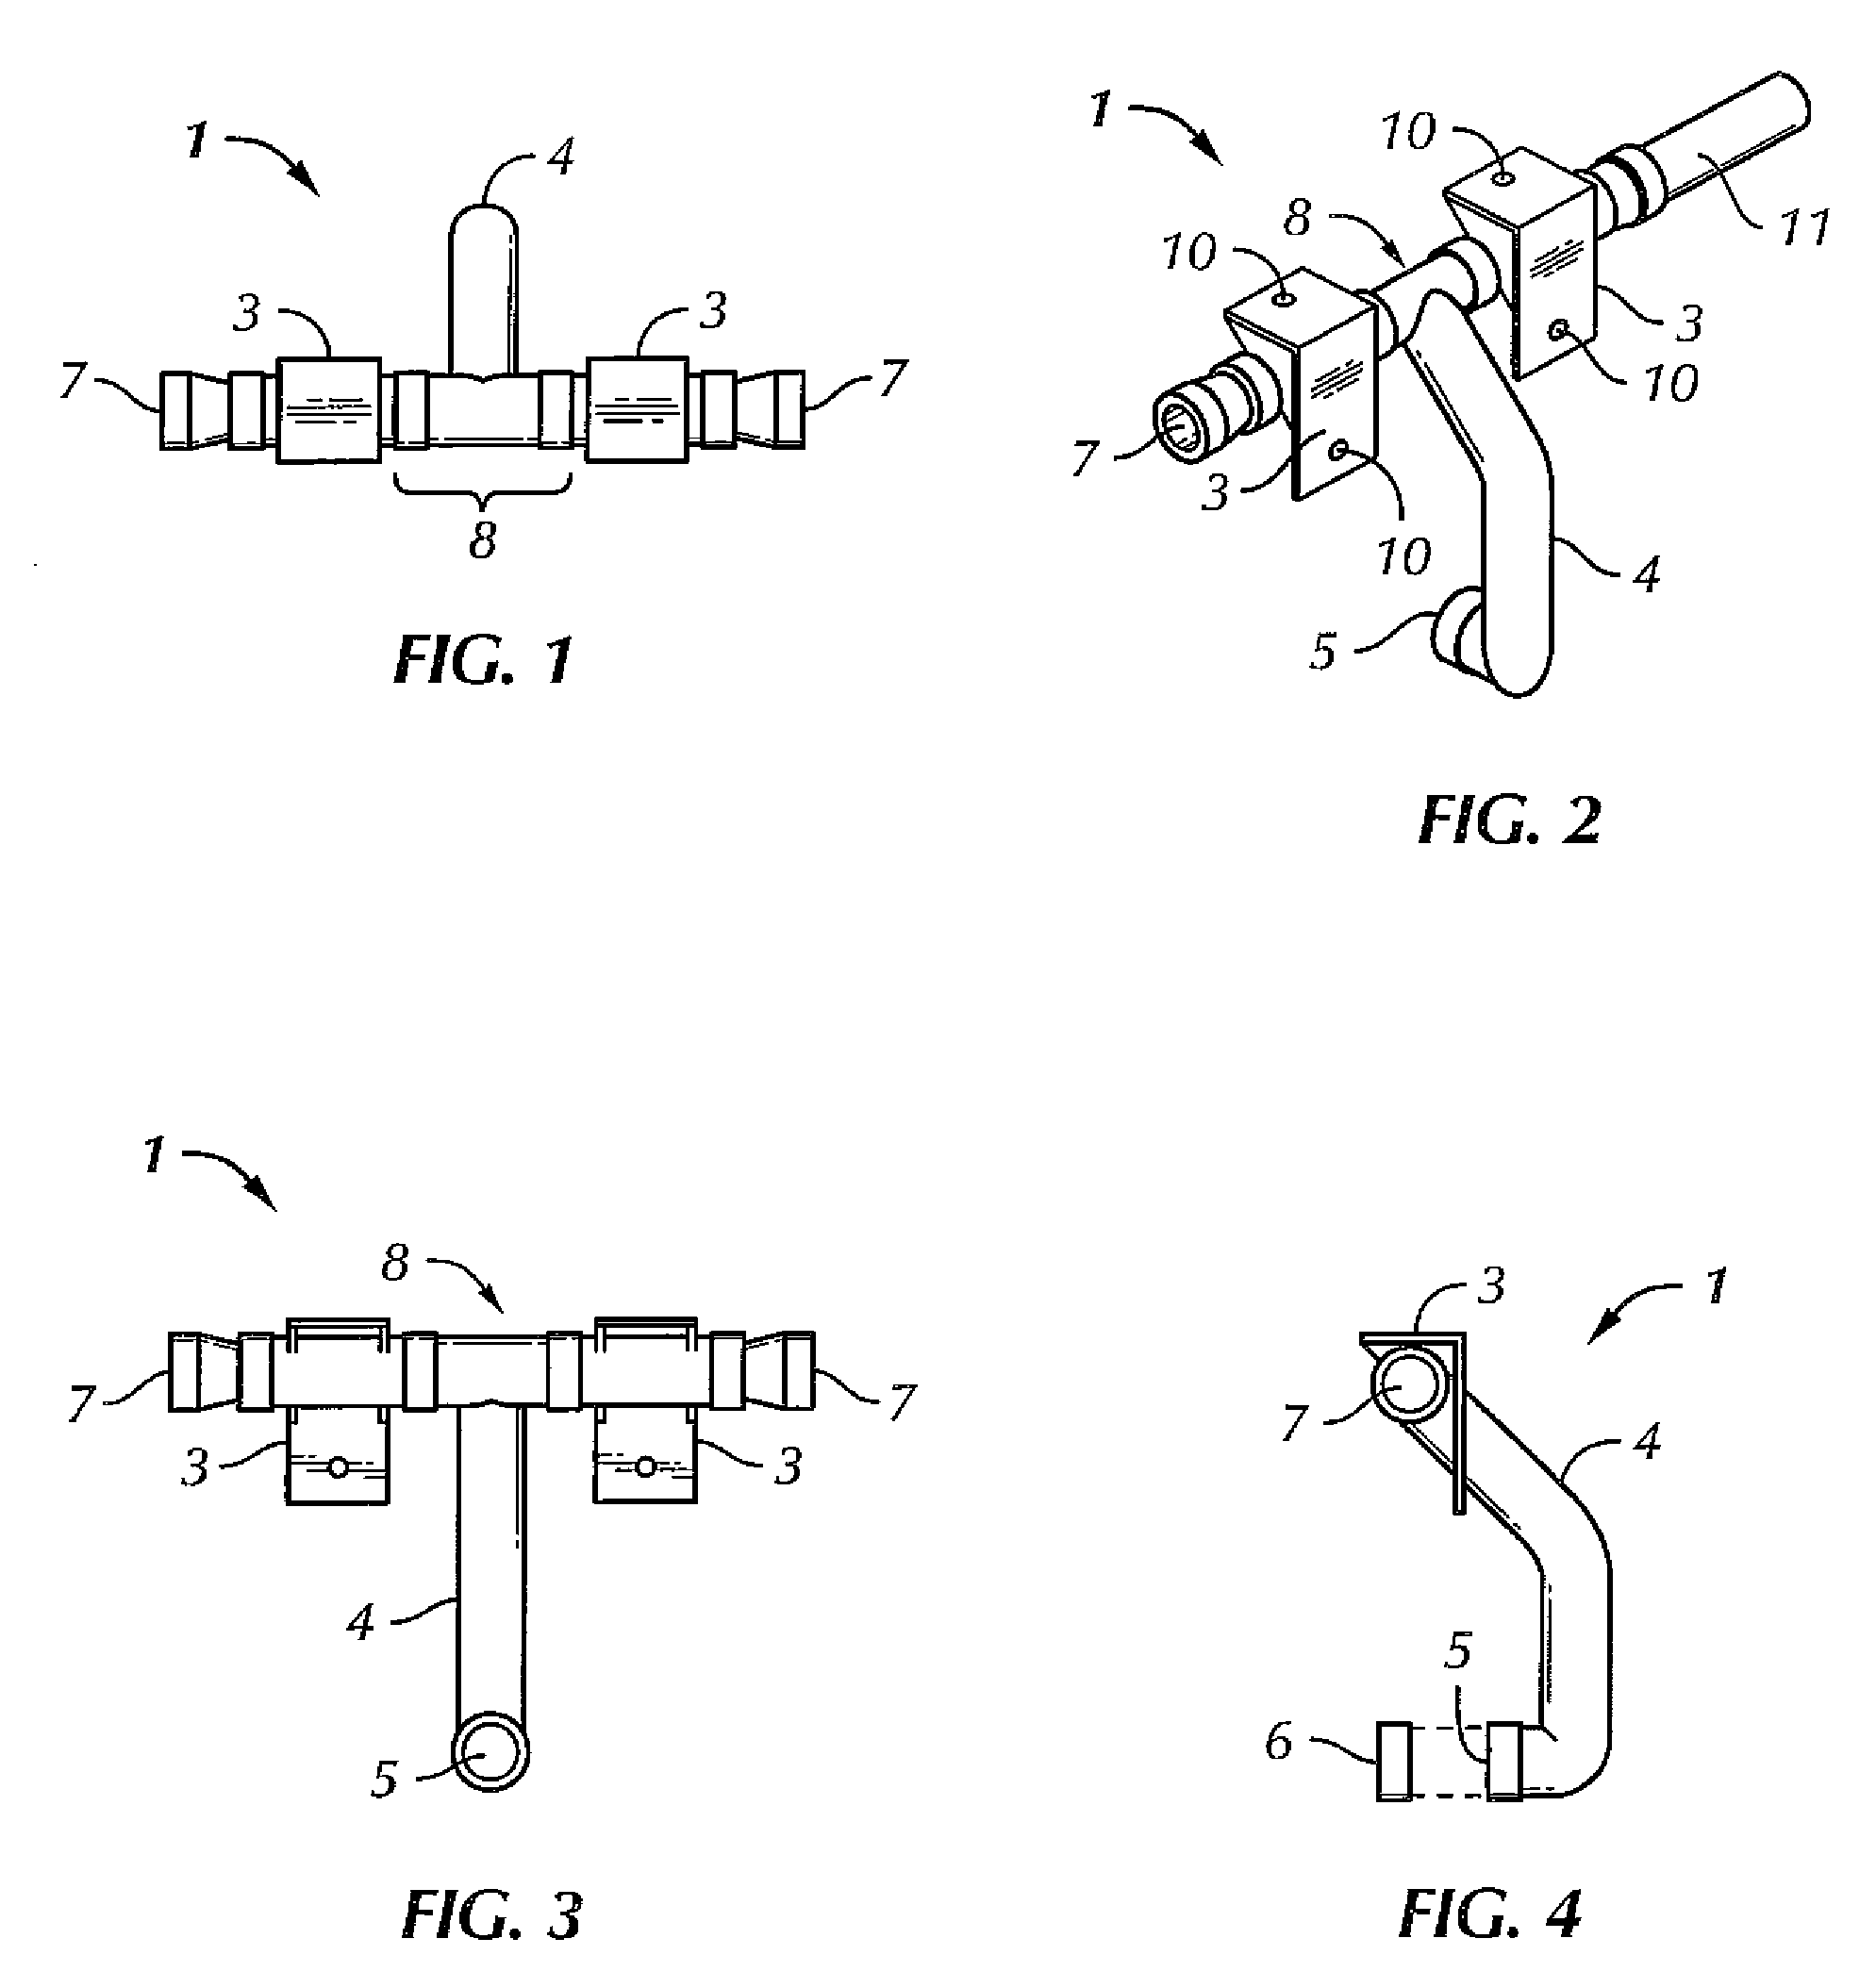 Fire protection sprinkler system and related apparatus